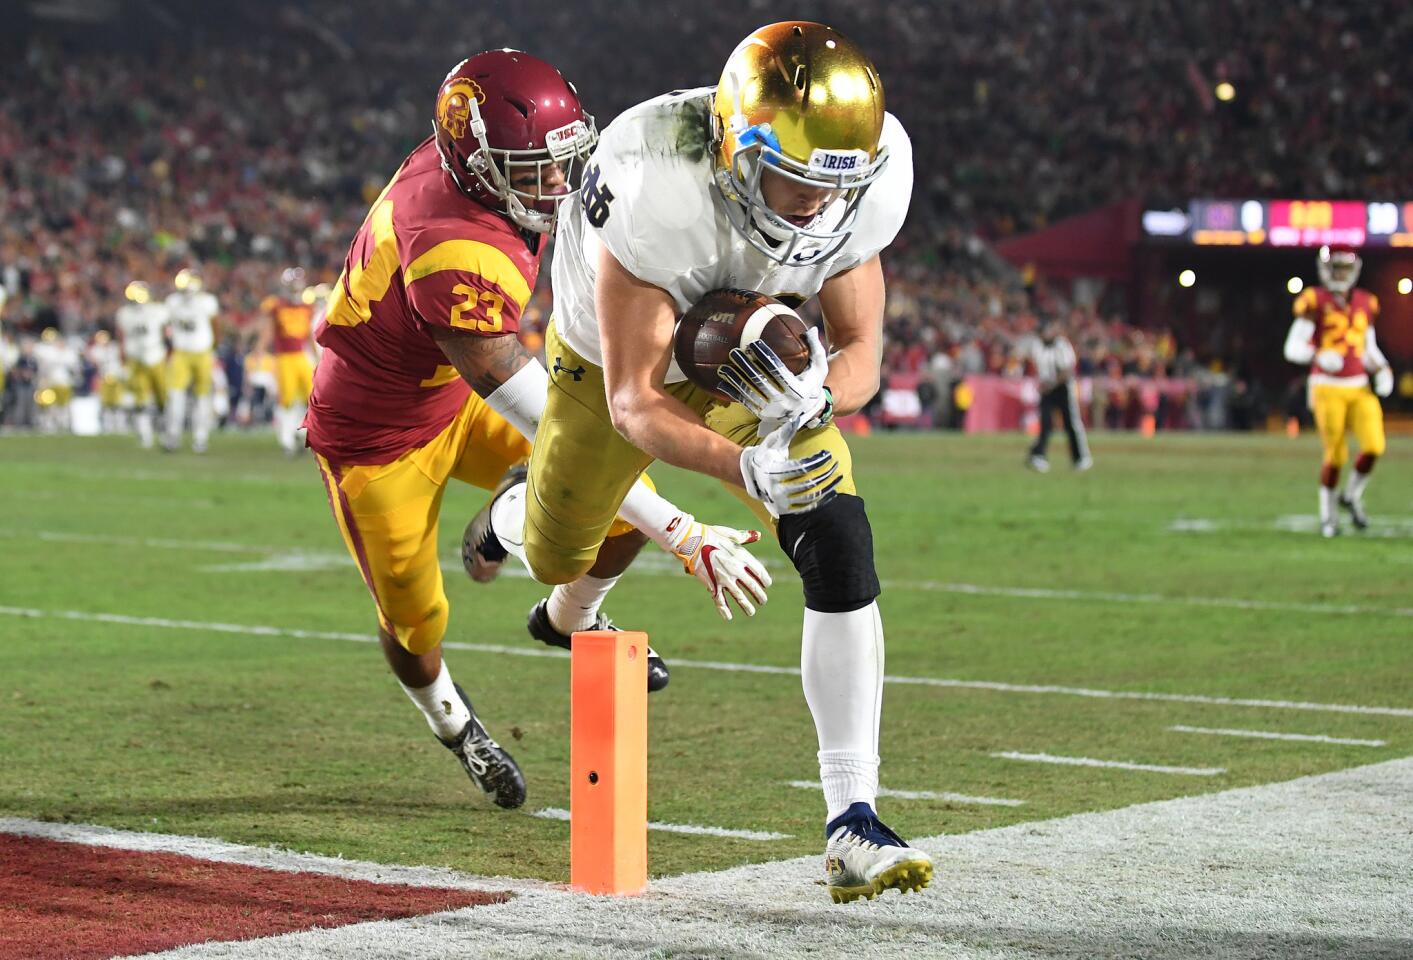 Notre Dame receiver Chris Finke catches a touchdown pass in front of USC's Jonathan Lockett in the second quarter at the Coliseum Saturday.